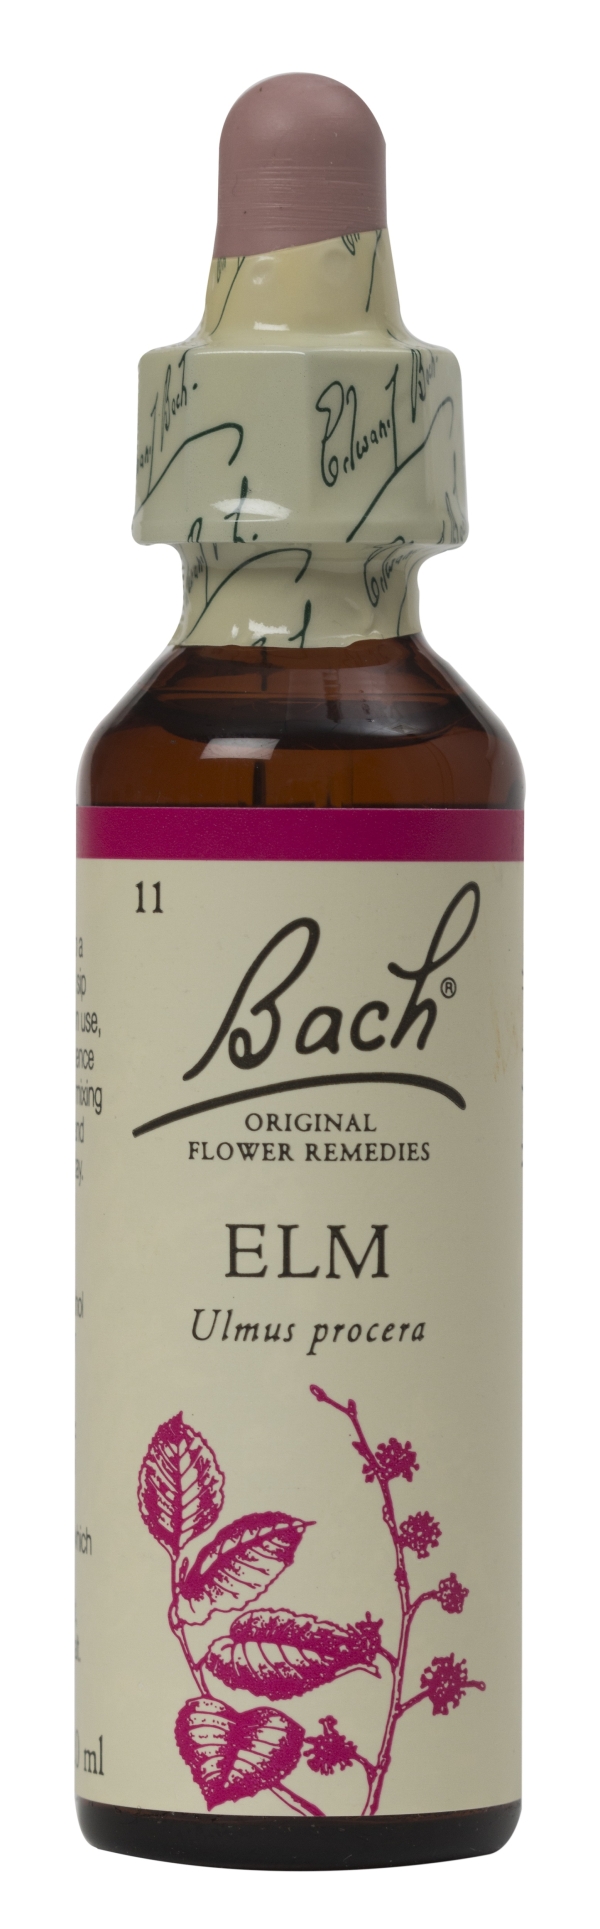 Nelson Bach Flower Remedies: Bach Elm Flower Remedy (20ml) available online here